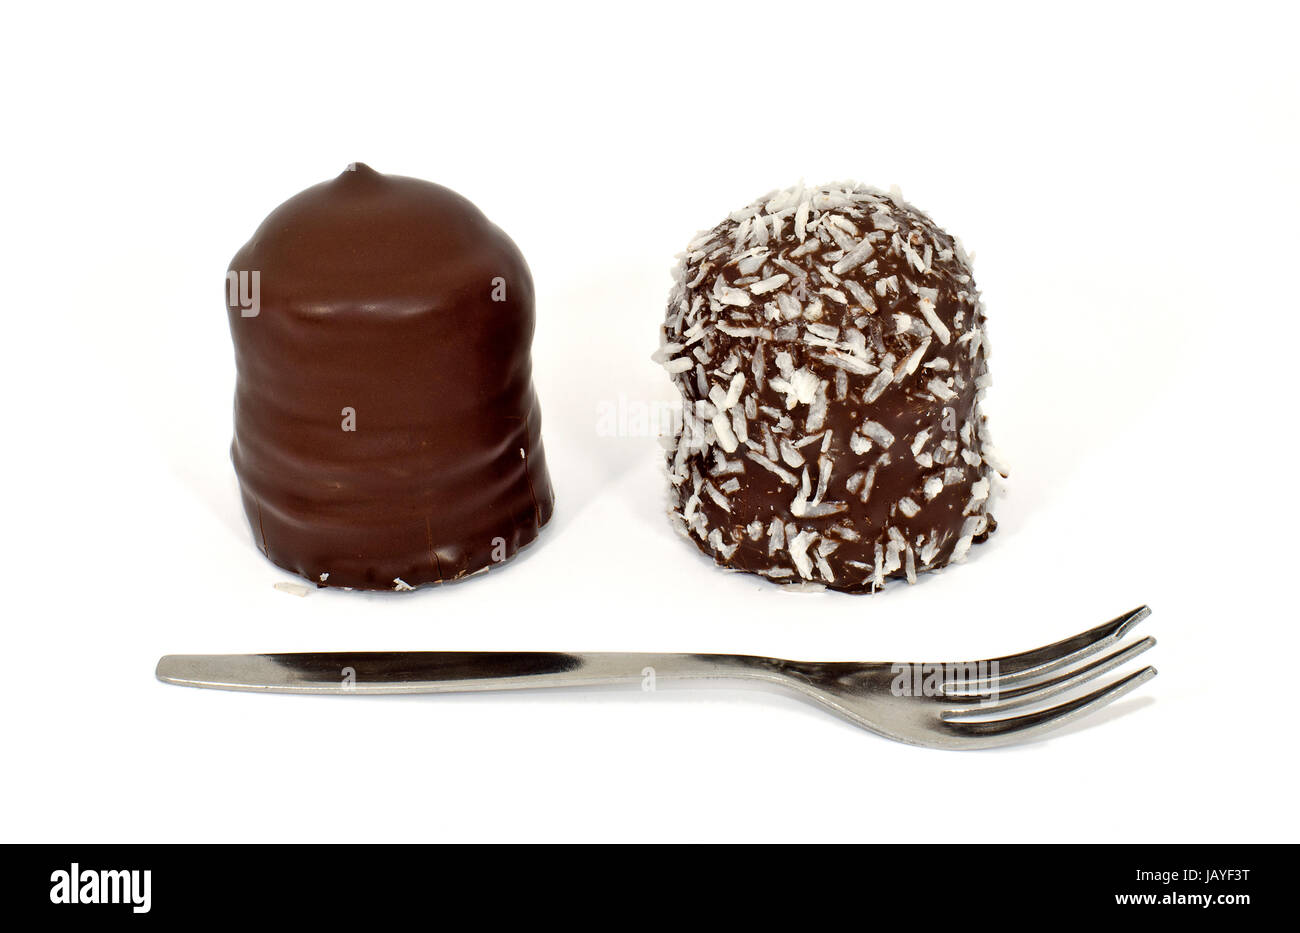 Zwei Schokoküsse mit Gabel; two chocolate covered marshmallow treats and a small fork Stock Photo